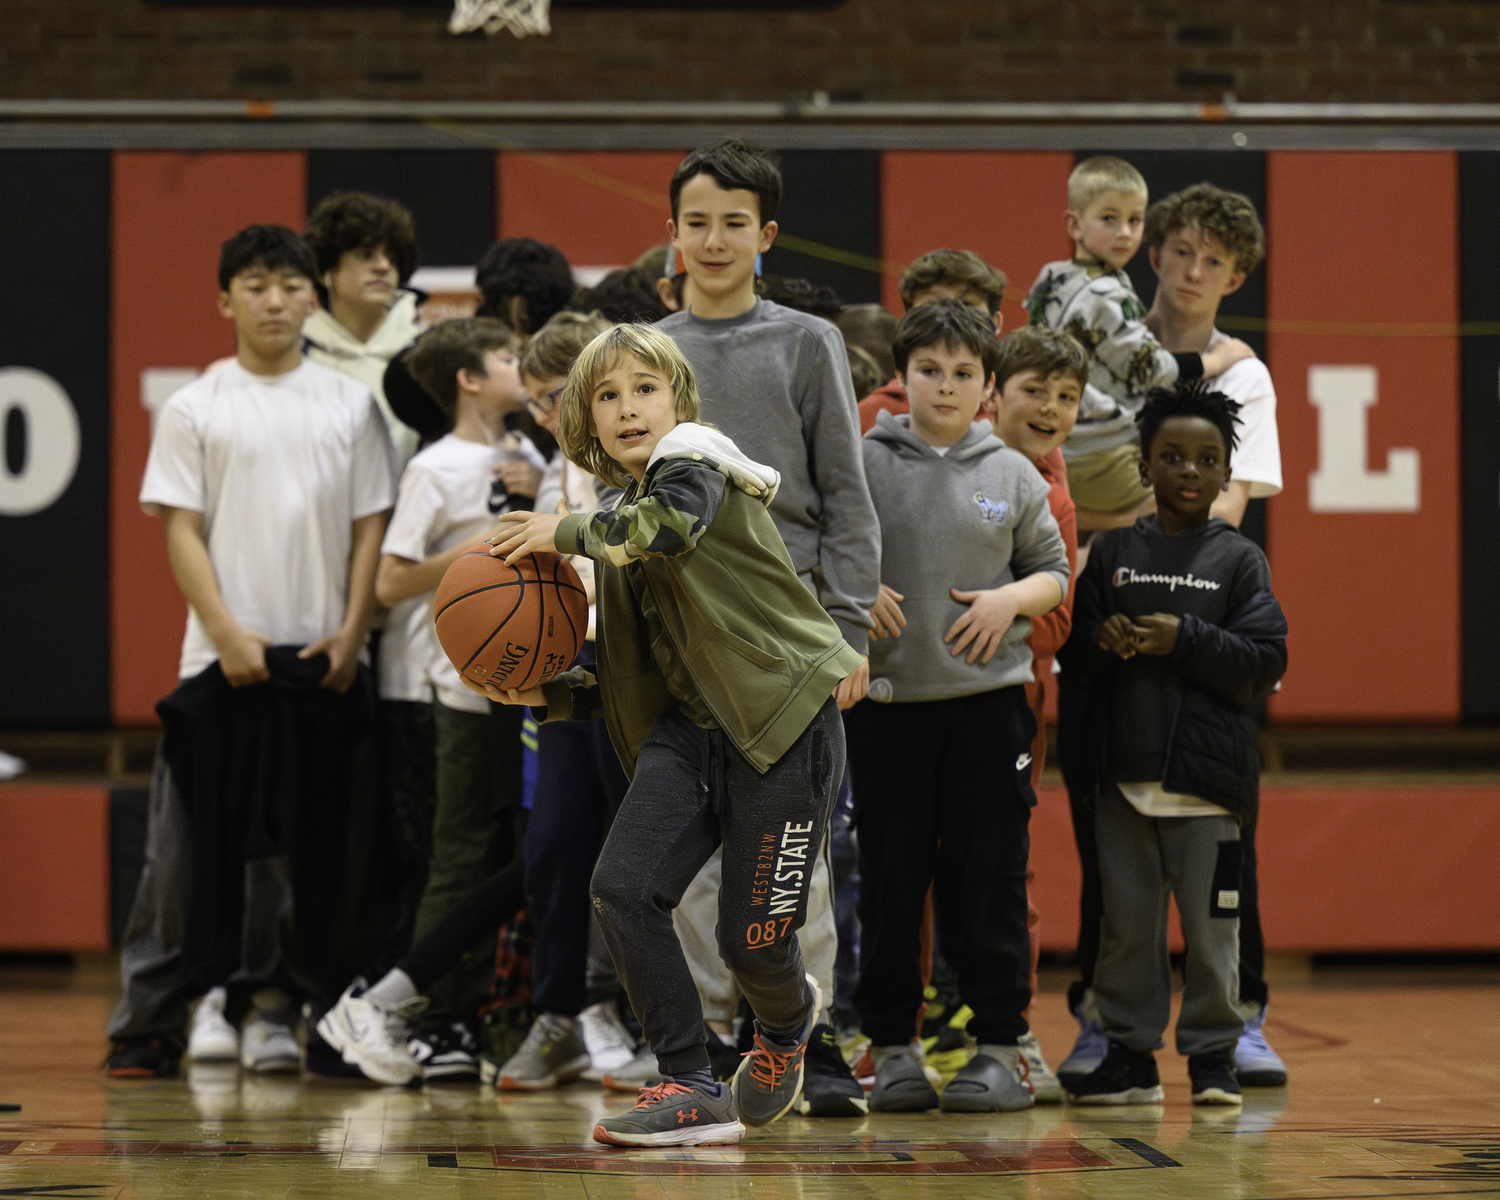 Kids line up to take their shot from halfcourt during halftime of the boy's game on Friday night.  MARIANNE BARNETT